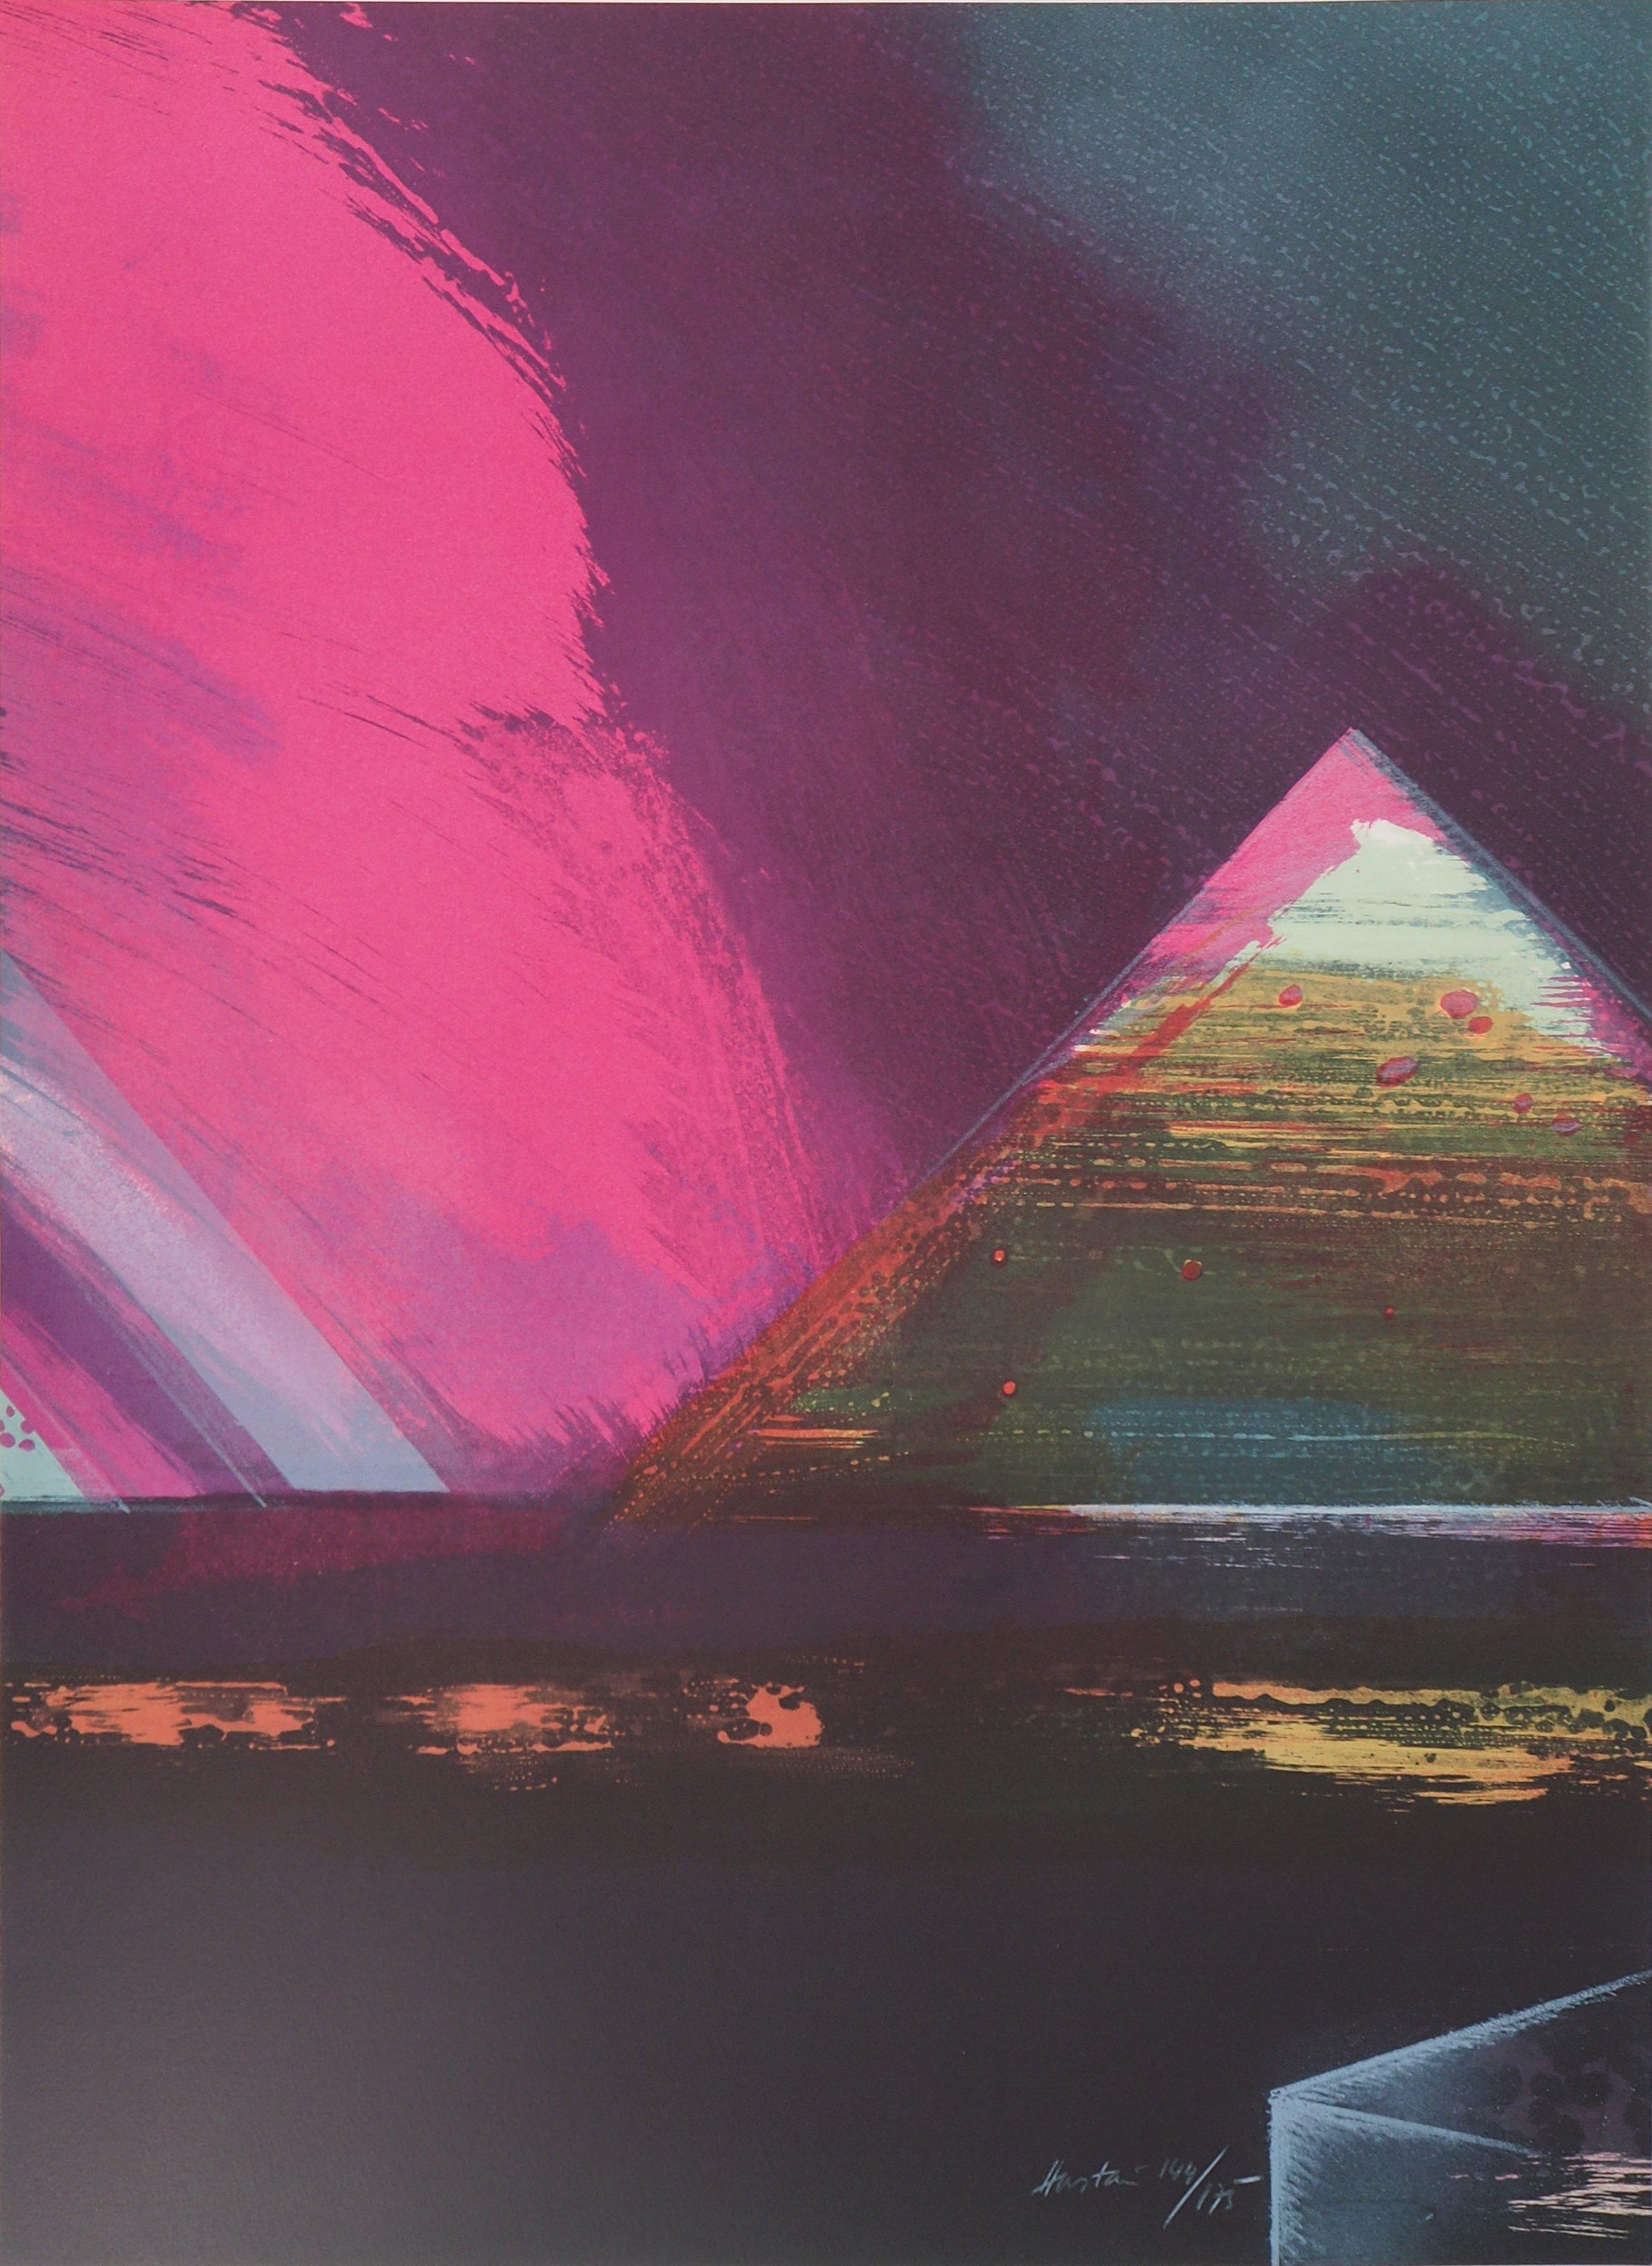 Claude HASTAIRE Landscape Print - Egypt : Great Pyramid of Kheops - Original handsigned lithograph, Ltd 175 proofs